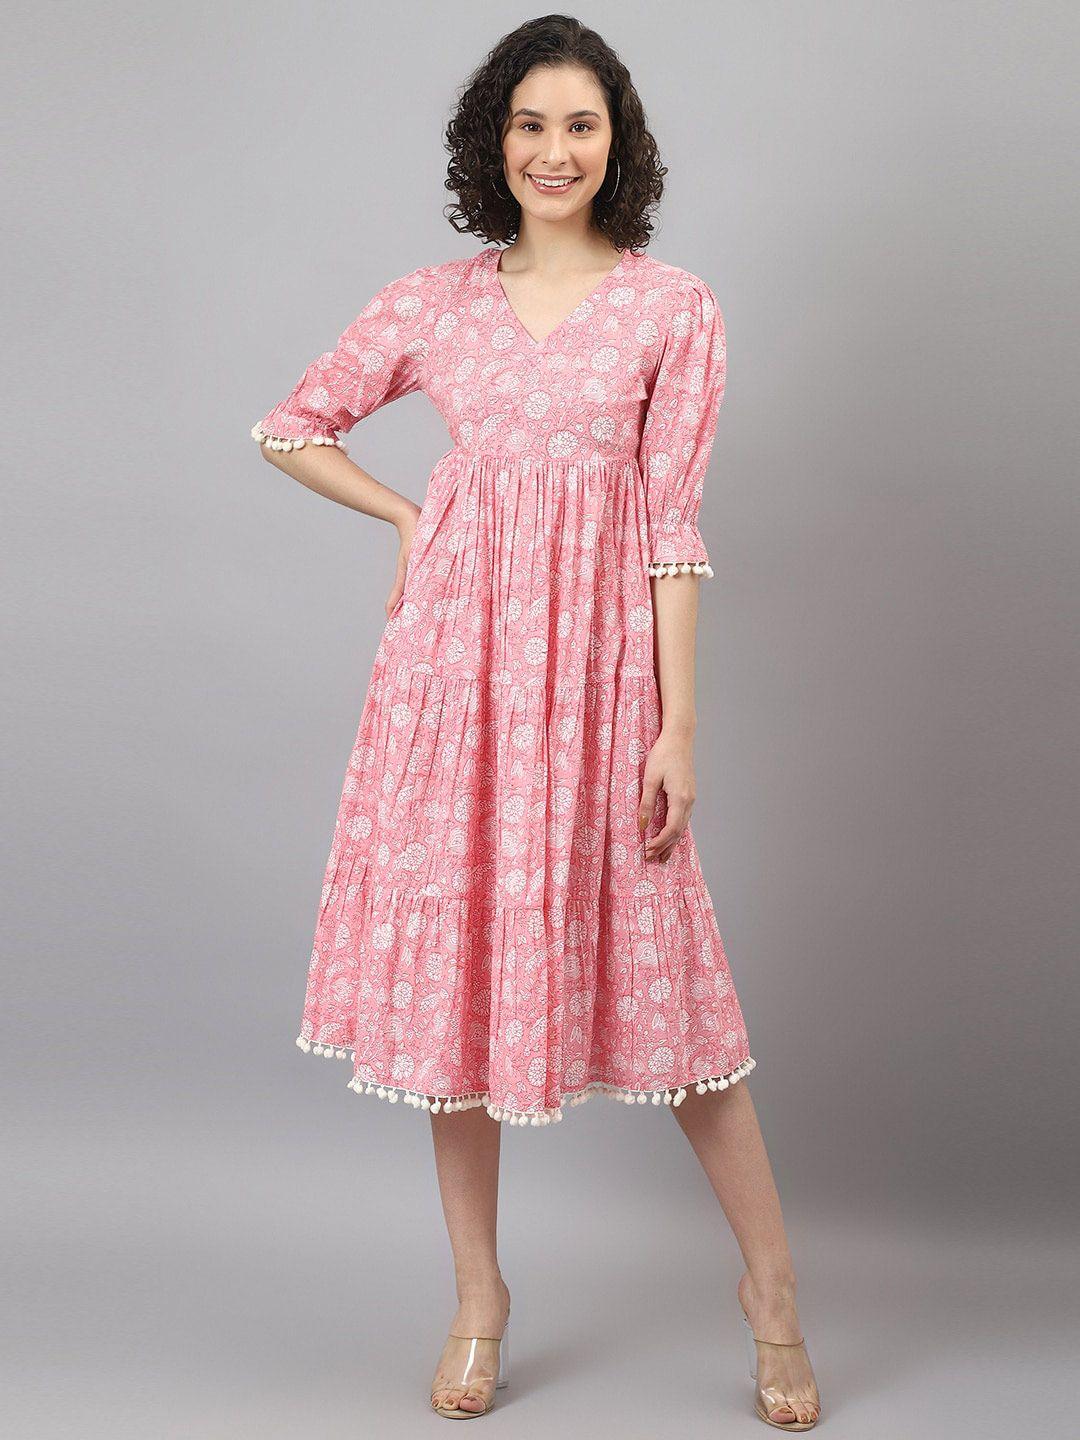 deebaco-pink-floral-printed-puff-sleeves-fit-&-flare-cotton-dress